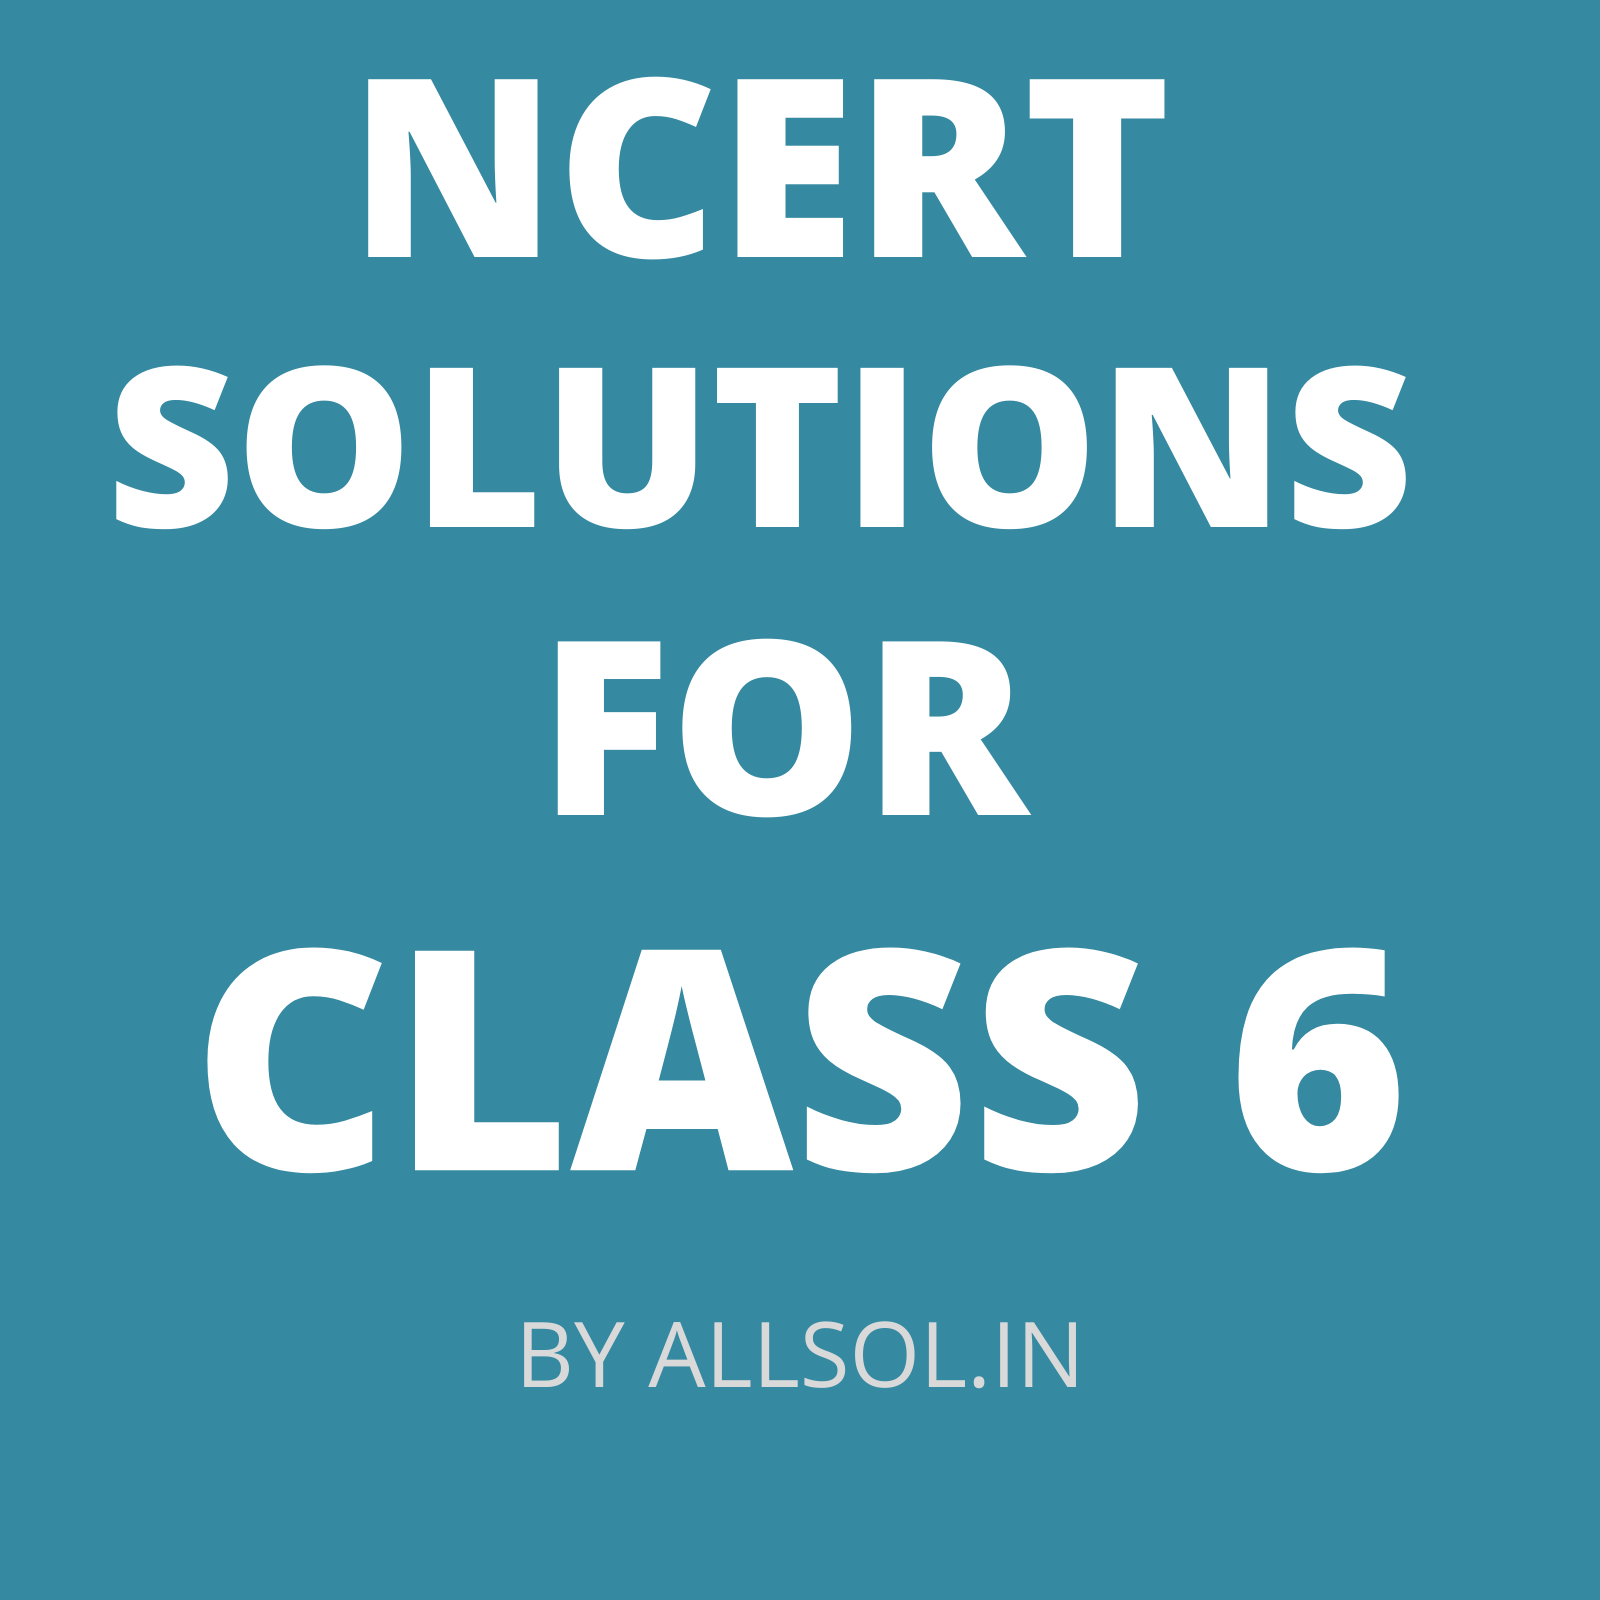 NCERT Solutions for Class 6 |